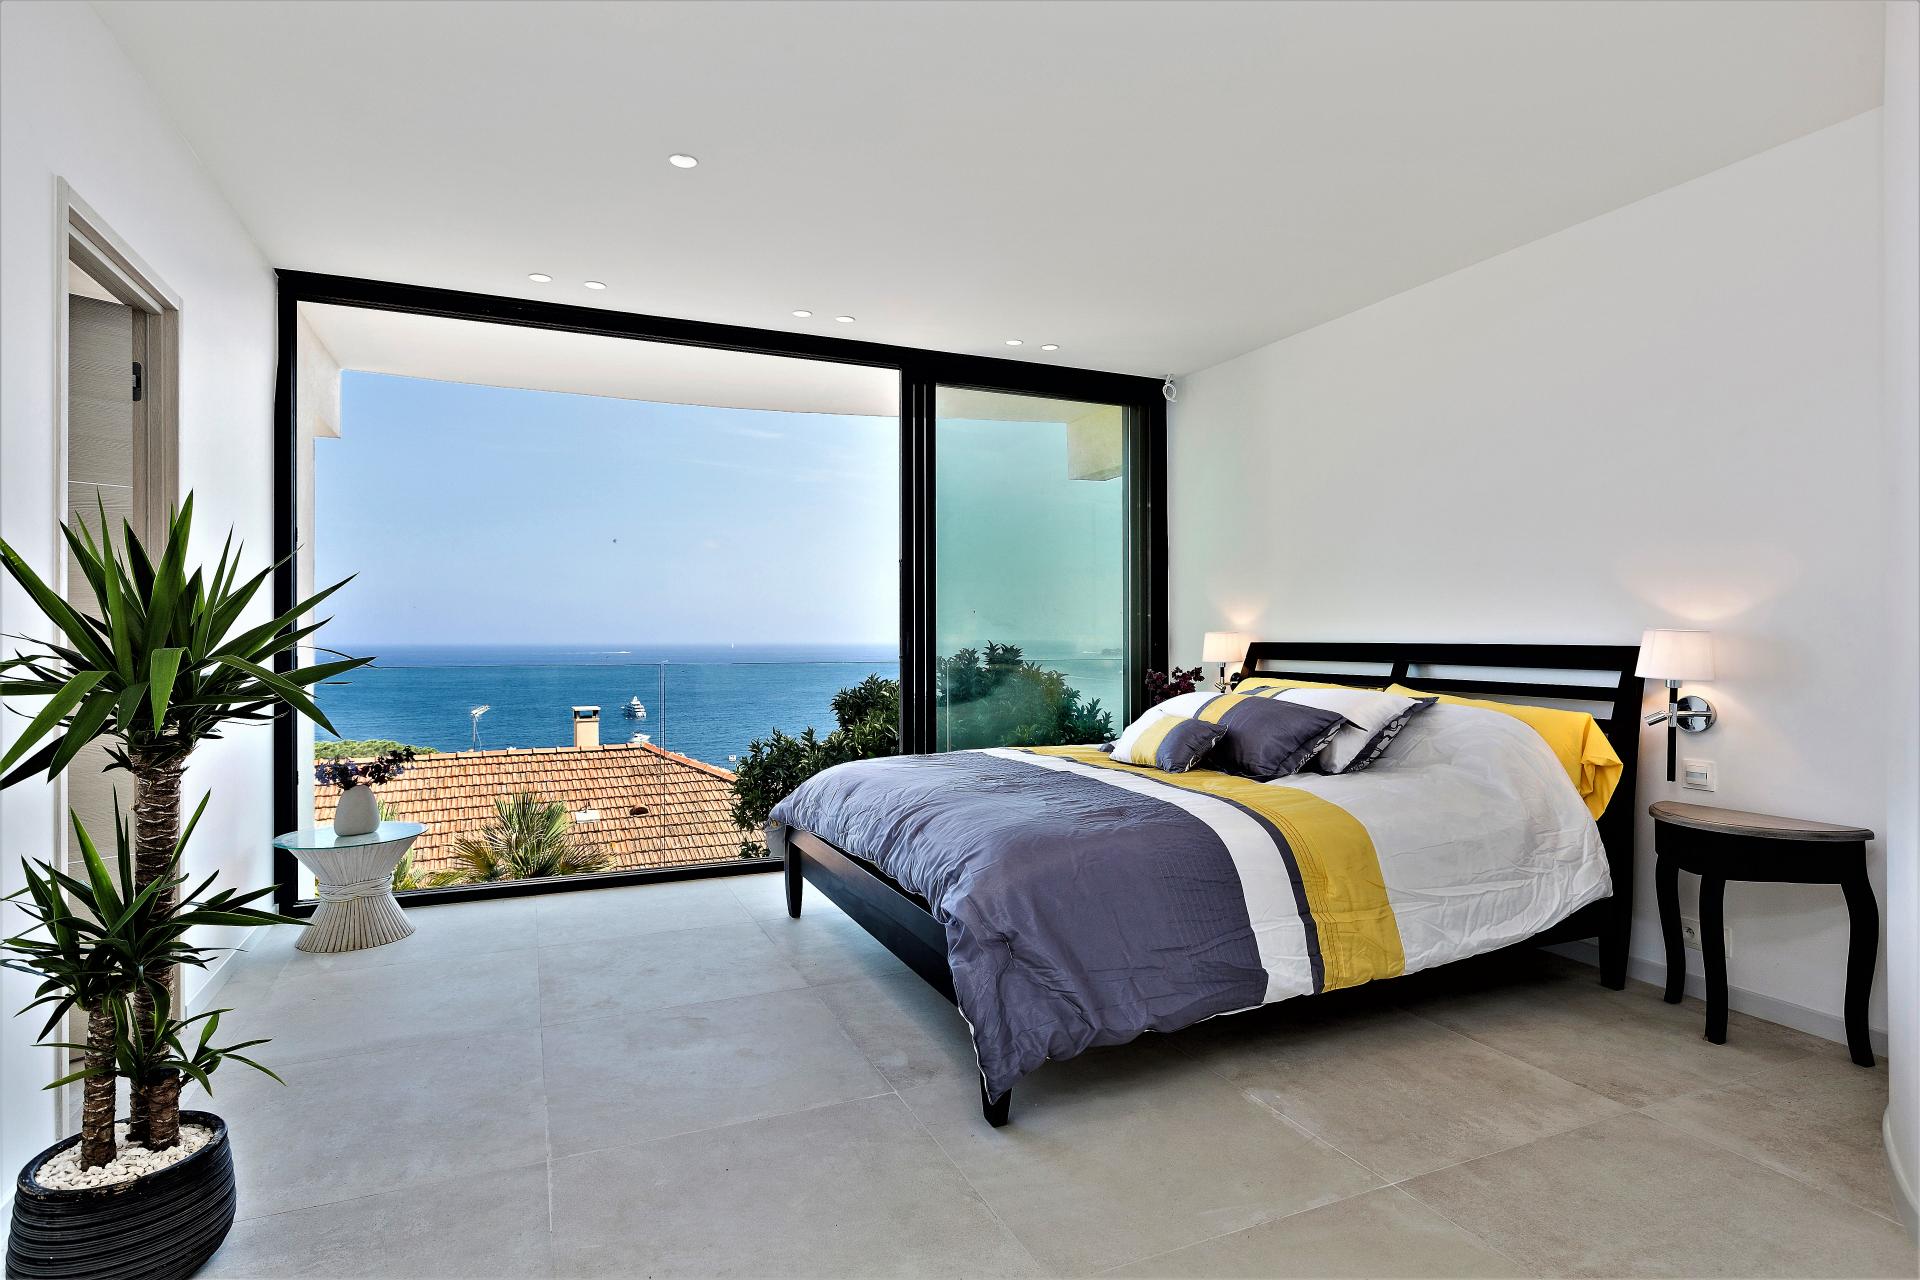 VILLA INFINITY AND ONE OF ITS NICE BEDROOM FOR A GREAT HOLIDAY IN EZE COTE D'AZUR